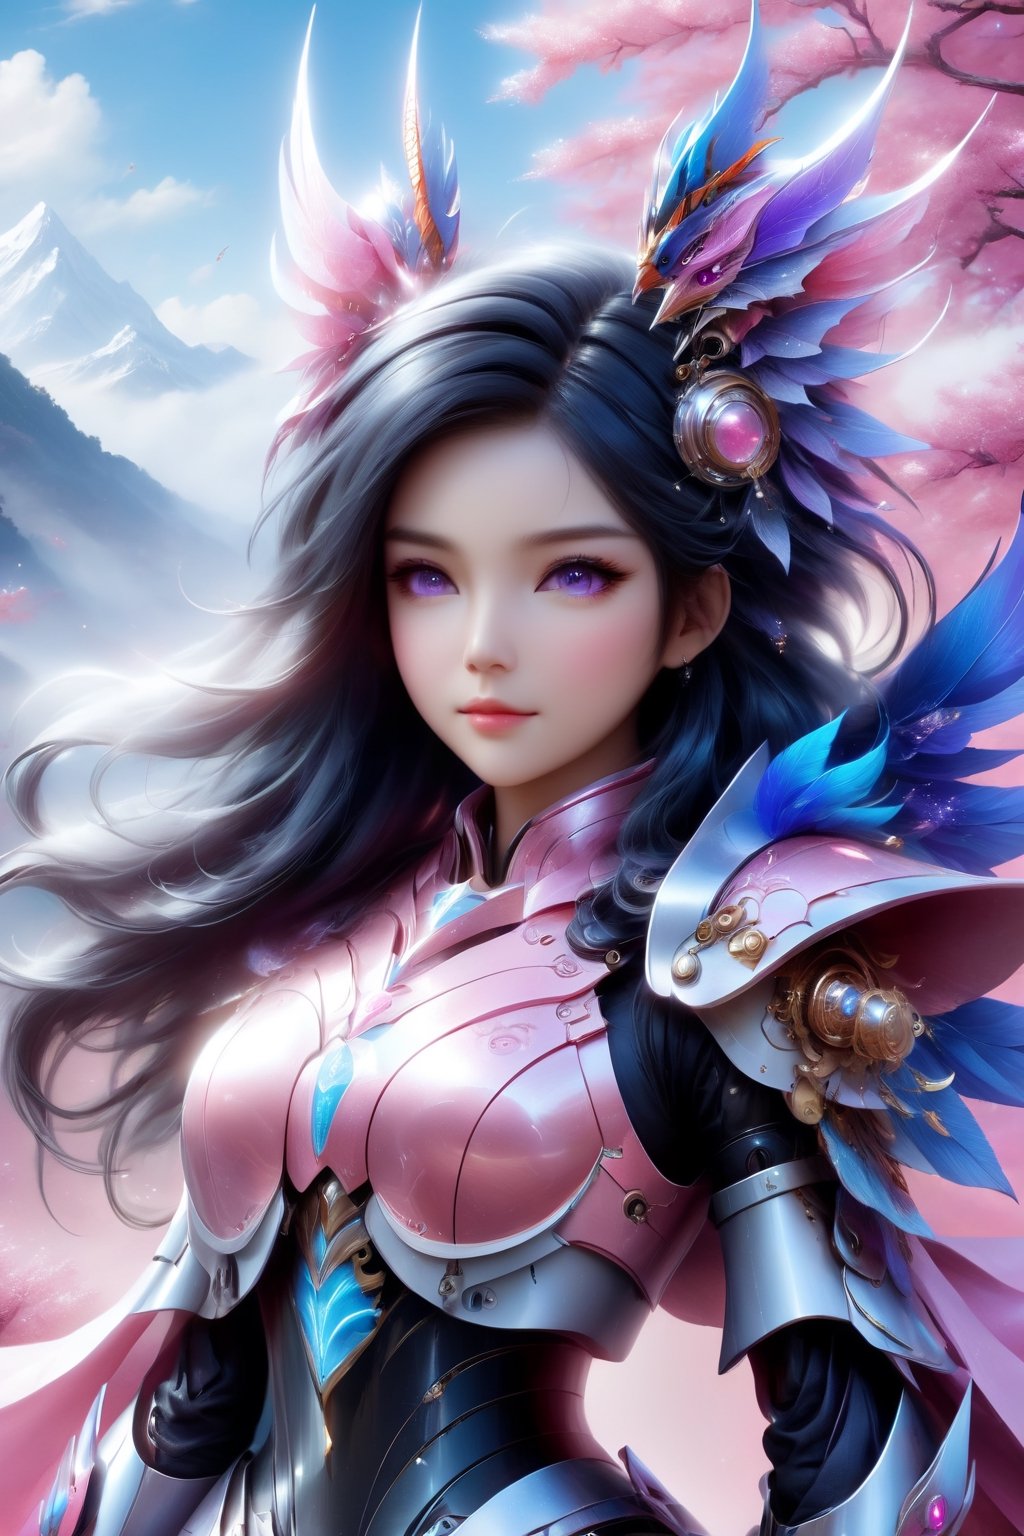 (full length view:1.5), (pink background:1.5), (masterpiece, best quality:1.33), Meet a Girl robot, 20-year-old robot companion, round azure eyes. Mountain, water, trees, a cute baby red dragon, Its charming head is predominantly adorned in a delightful blend of sky blue and purple, leaning more towards the pristine white shade. The round face exudes an endearing appeal, paired with a petite armored body that adds to its adorable nature. All set against a clean and immaculate white background, this girl robot encapsulates the perfect fusion of cuteness and innovation, happy smile, (high quality, 8k, best composition, symmetry, aesthetic), (made in adobe illustrator:1.33), 

front_view, (1girl, looking at viewer), black long hair, black metalic mechanical_armor, dynamic pose, delicate pink filigree, intricate filigree, black metalic parts, intricate armor, detailed part, open eyes, seductive eyes, steampunk style,mecha,4nime style,DonMPl4sm4T3chXL ,xxmix_girl,mythical clouds,EpicSky,cloud,Sci-fi,LinkGirl,Chibi Style,DonMB4nsh33XL 